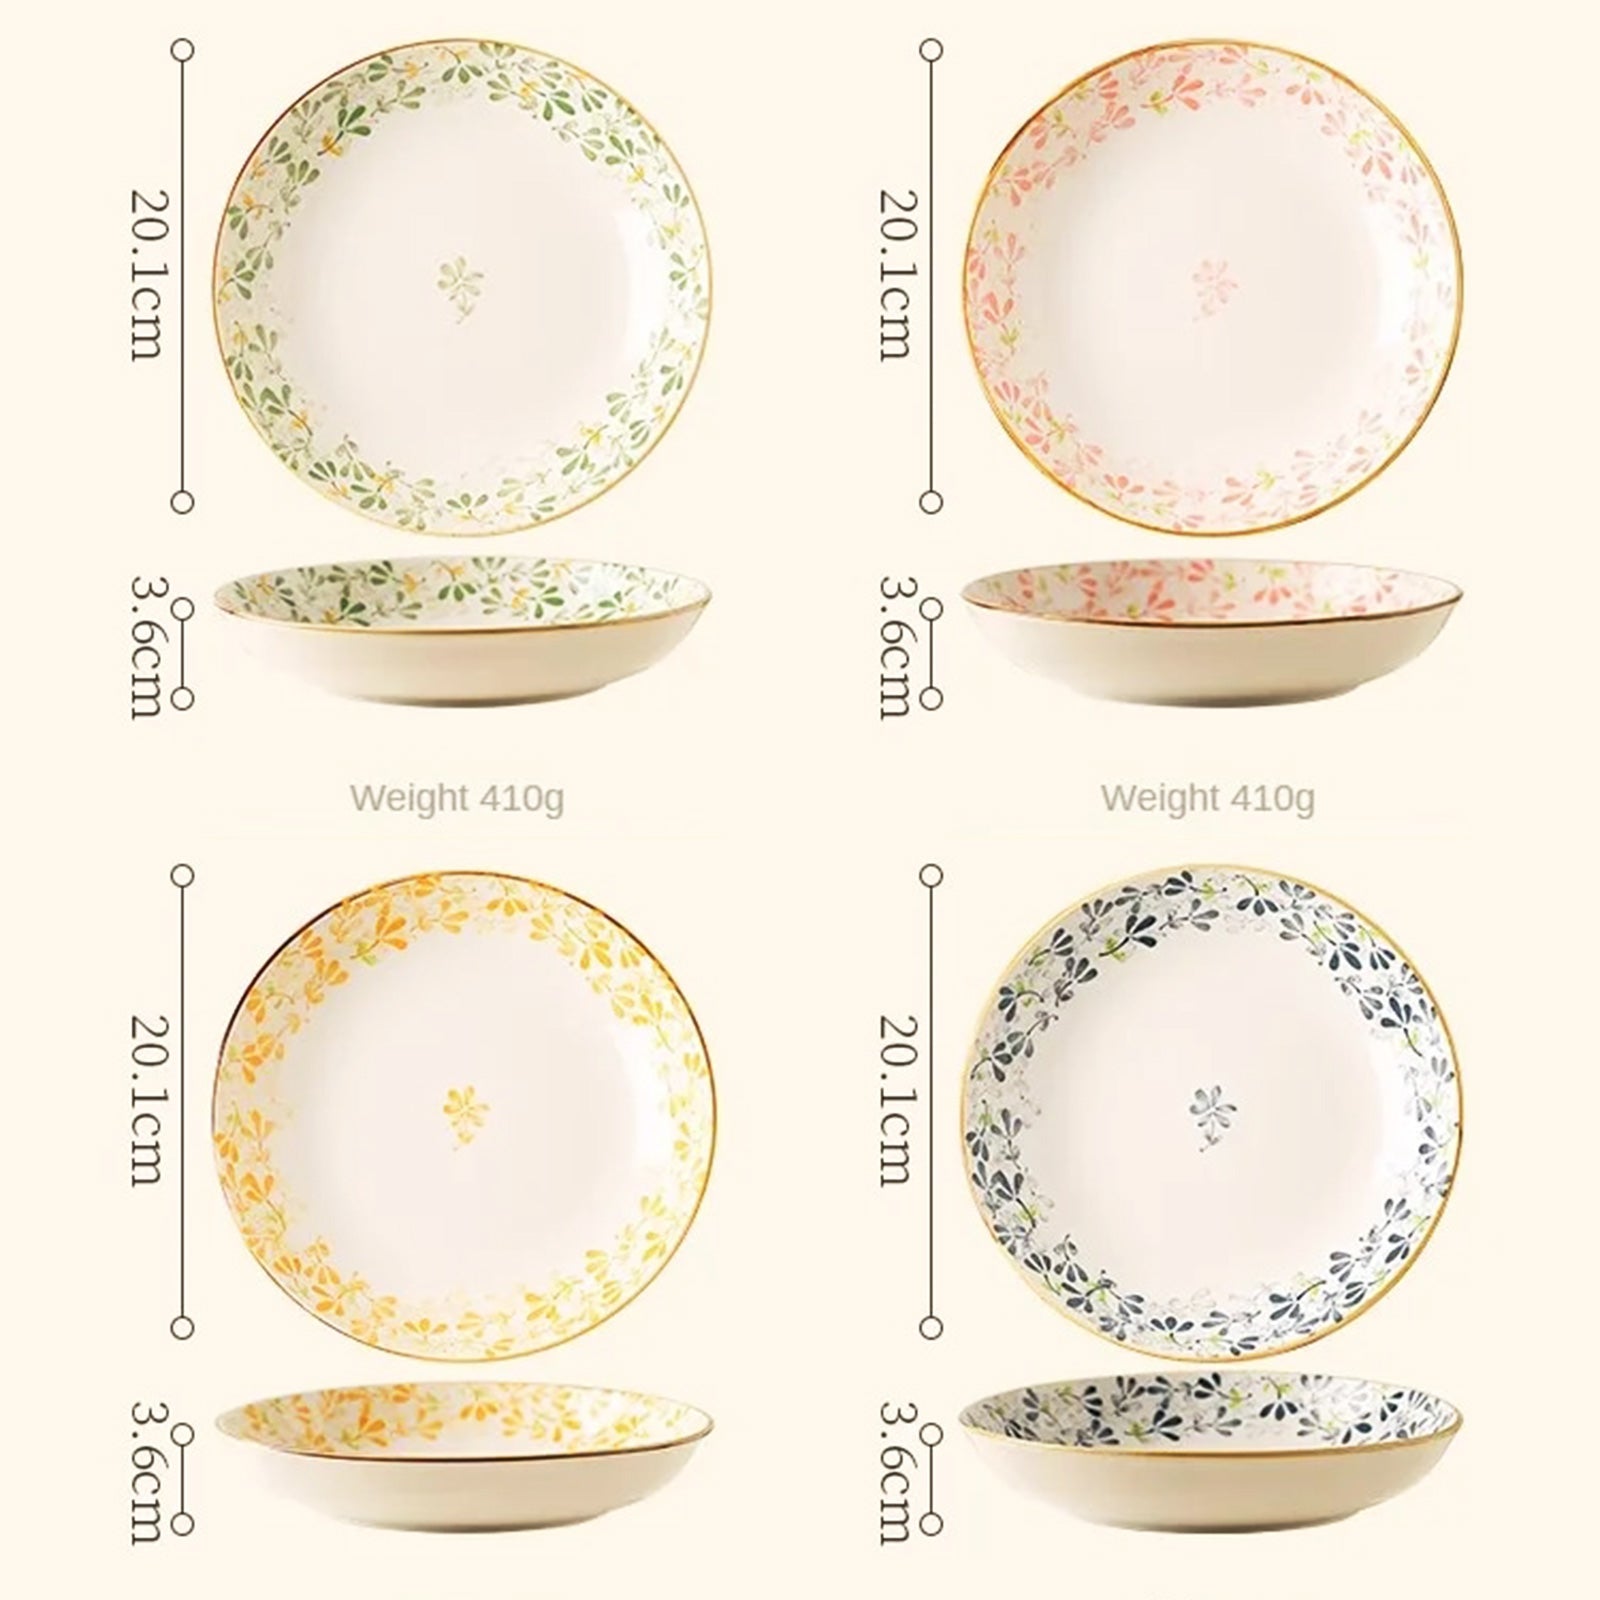 Charming Retro Bowls with Dish and Floral Designs in Four Vibrant Colors